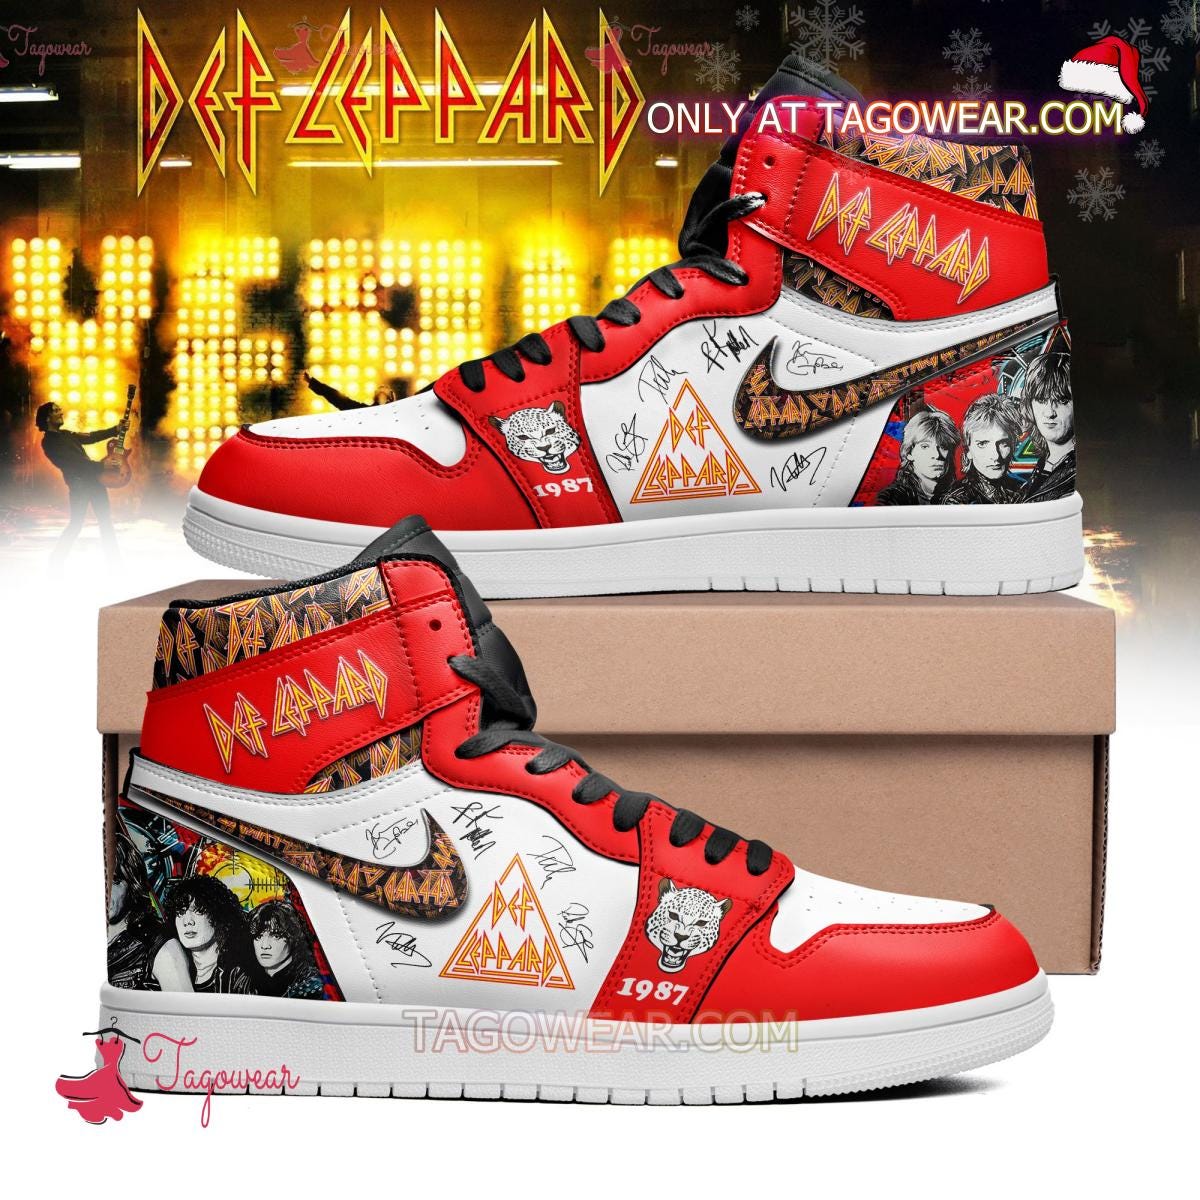 Rock in Style with Def Leppard Band Signatures Air Jordan High Top Shoes |  by Tagowear.com | Dec, 2023 | Medium